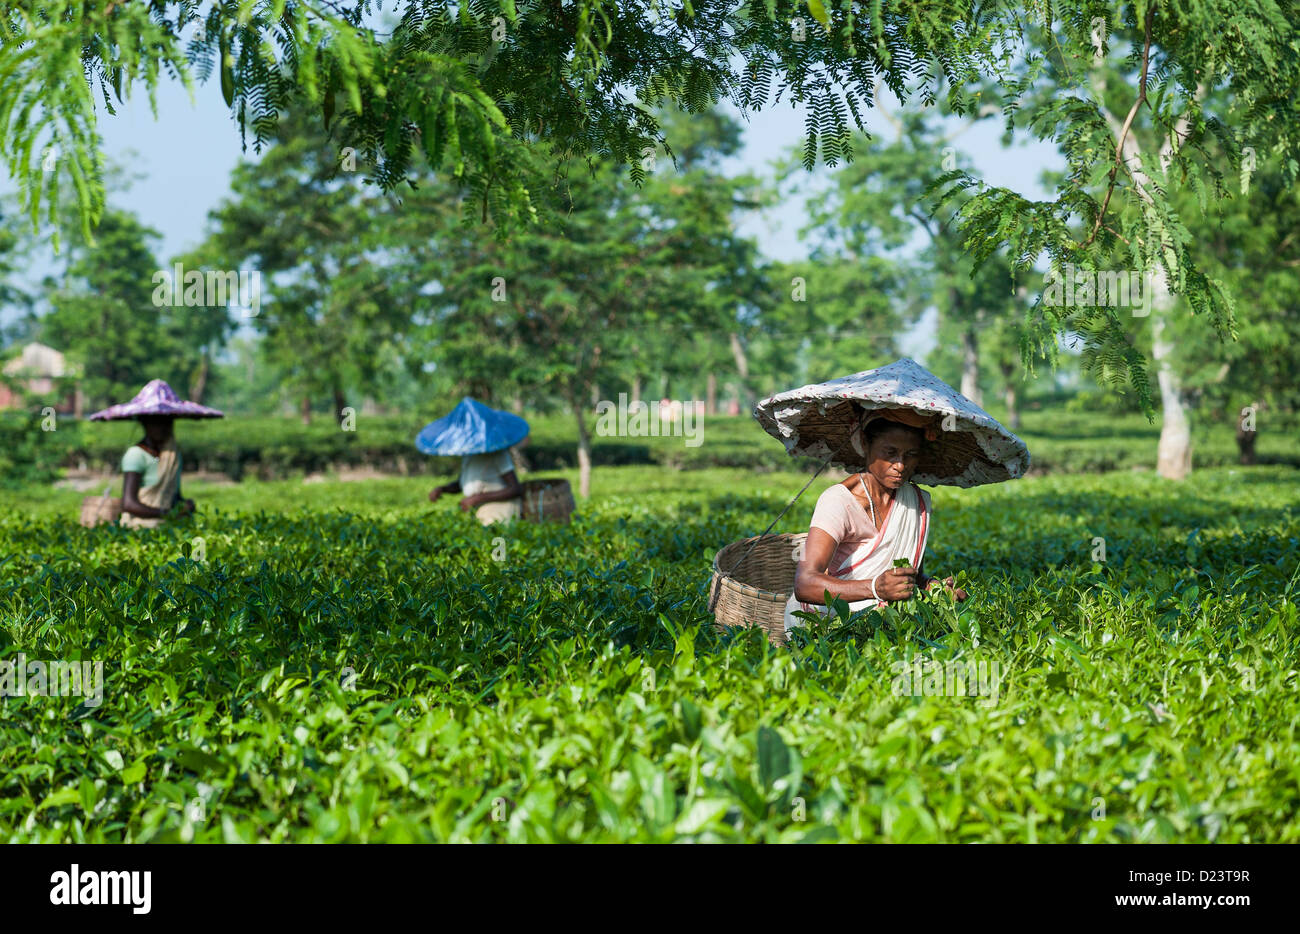 Tea leaf harvesters at work on a tea plantation in Jorhat, Assam, India. They collect the harvest in bamboo baskets. Stock Photo